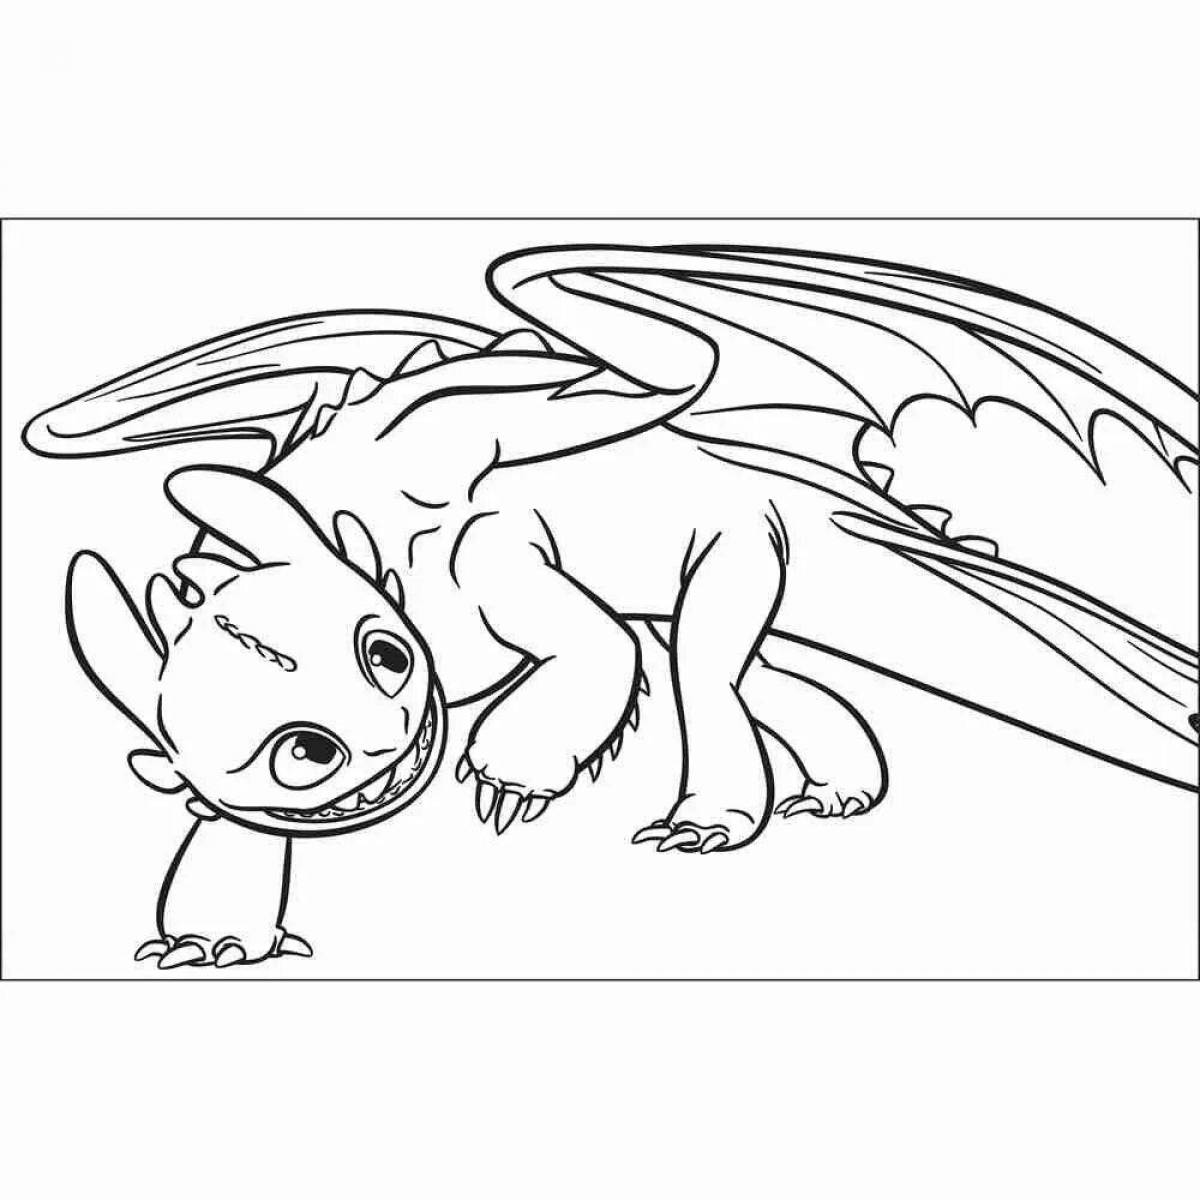 Toothless and white fury awesome coloring book